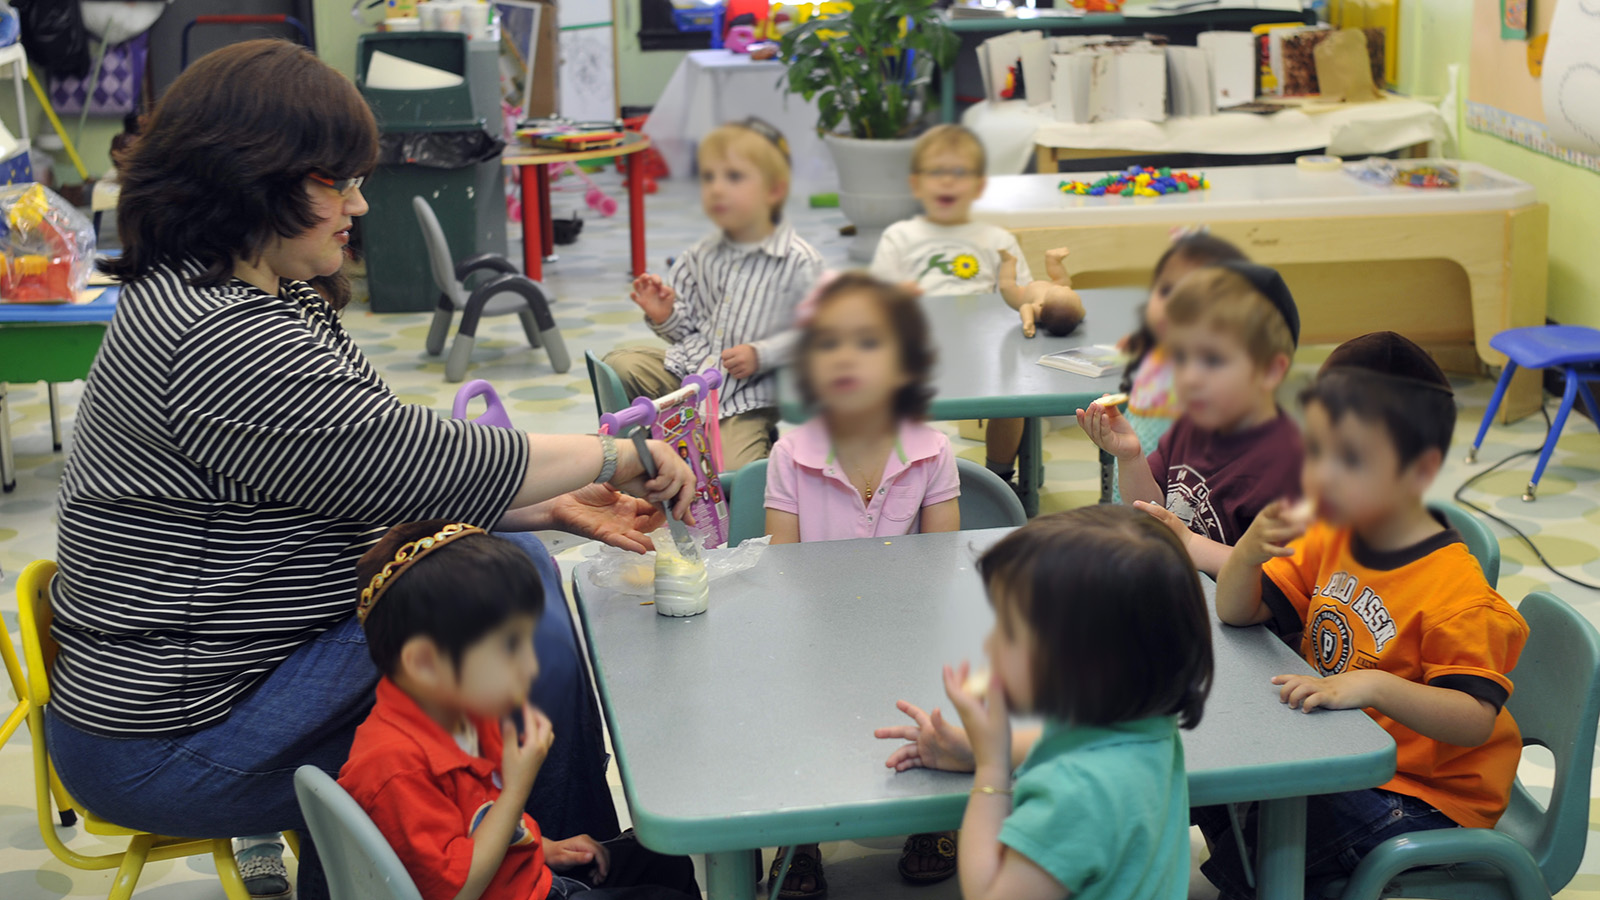 Snacktime at a preschool. Archival photograph: Sergey Atel/Flash90